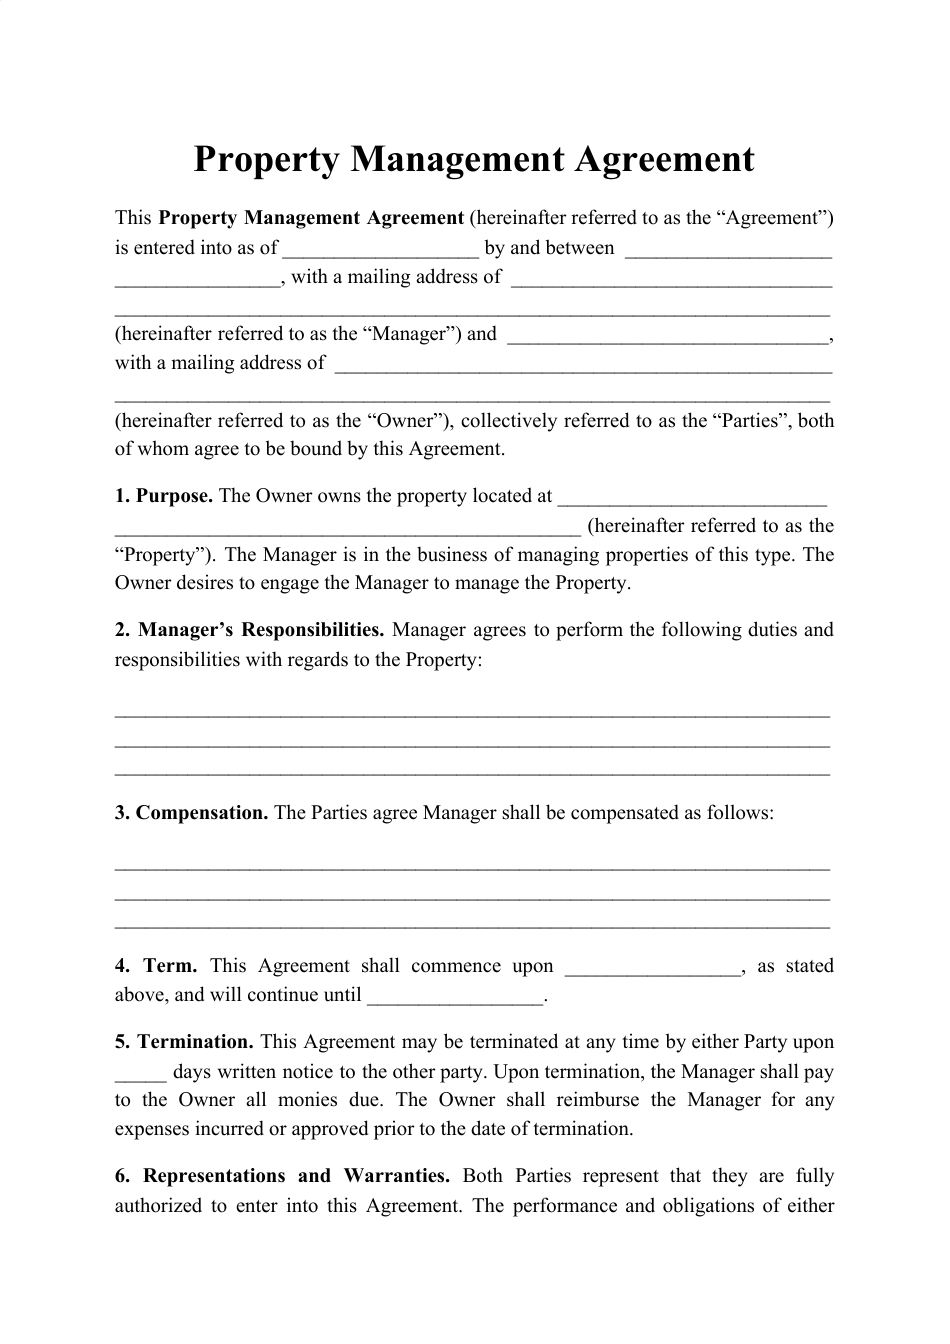 printable-property-management-agreement-template-printable-templates